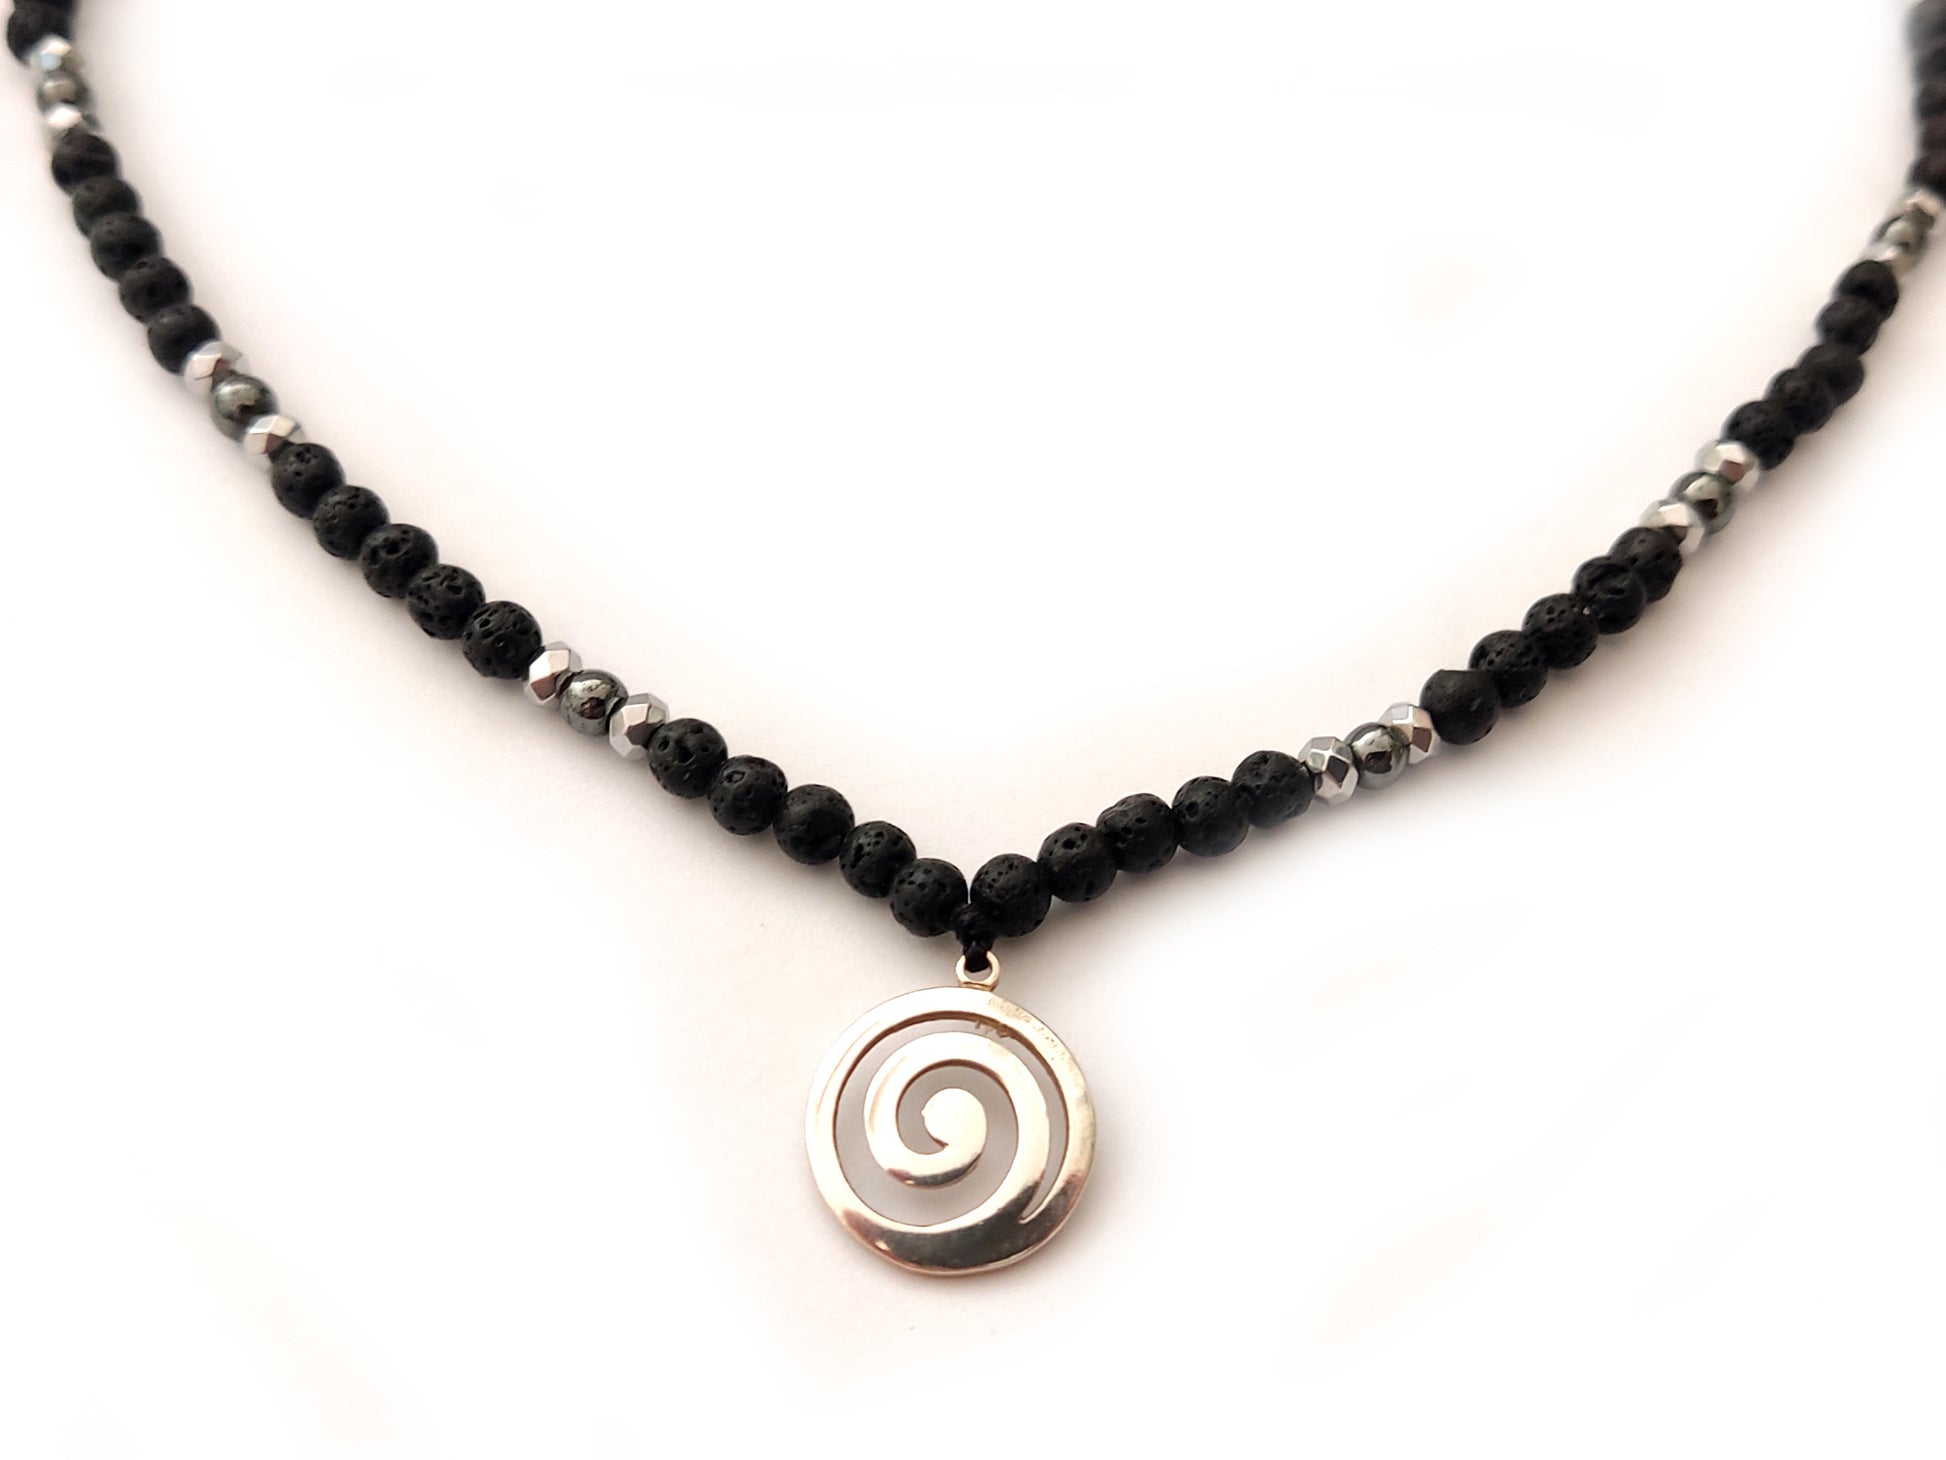 Greek spiral infinity silver pendant with natural volcanic lava stones made as a necklace.